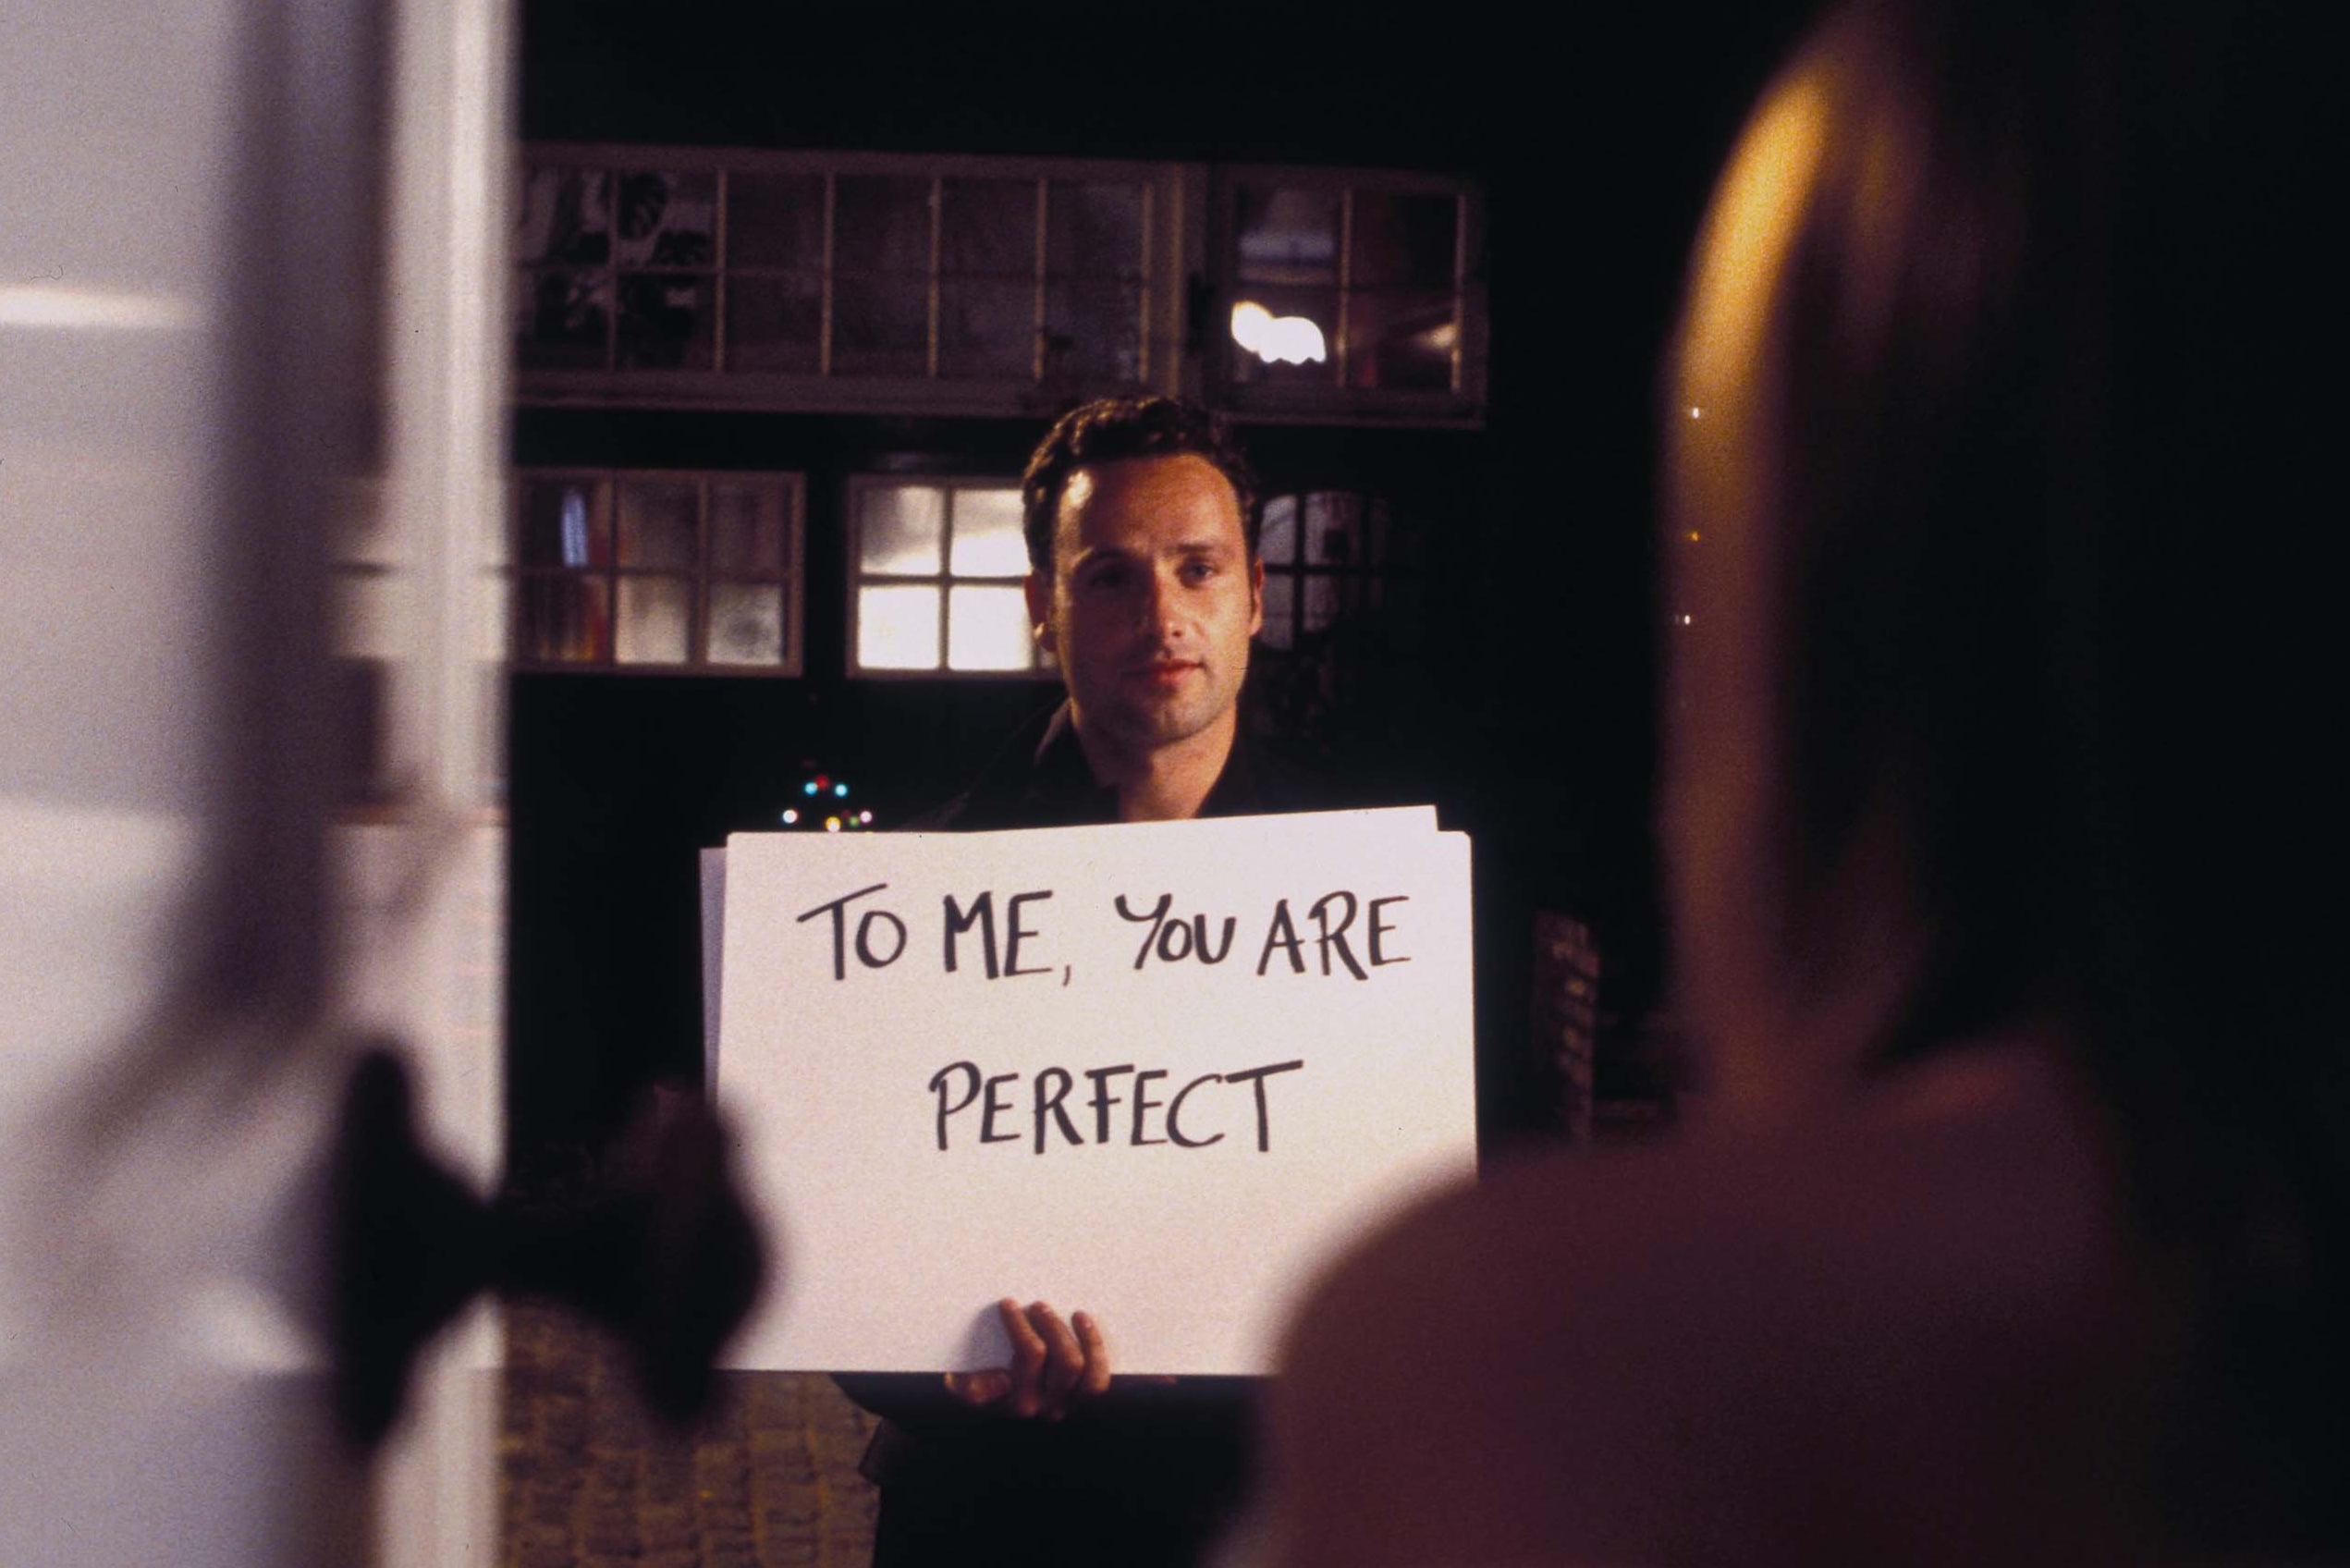 Lincoln as Mark in ‘Love Actually'